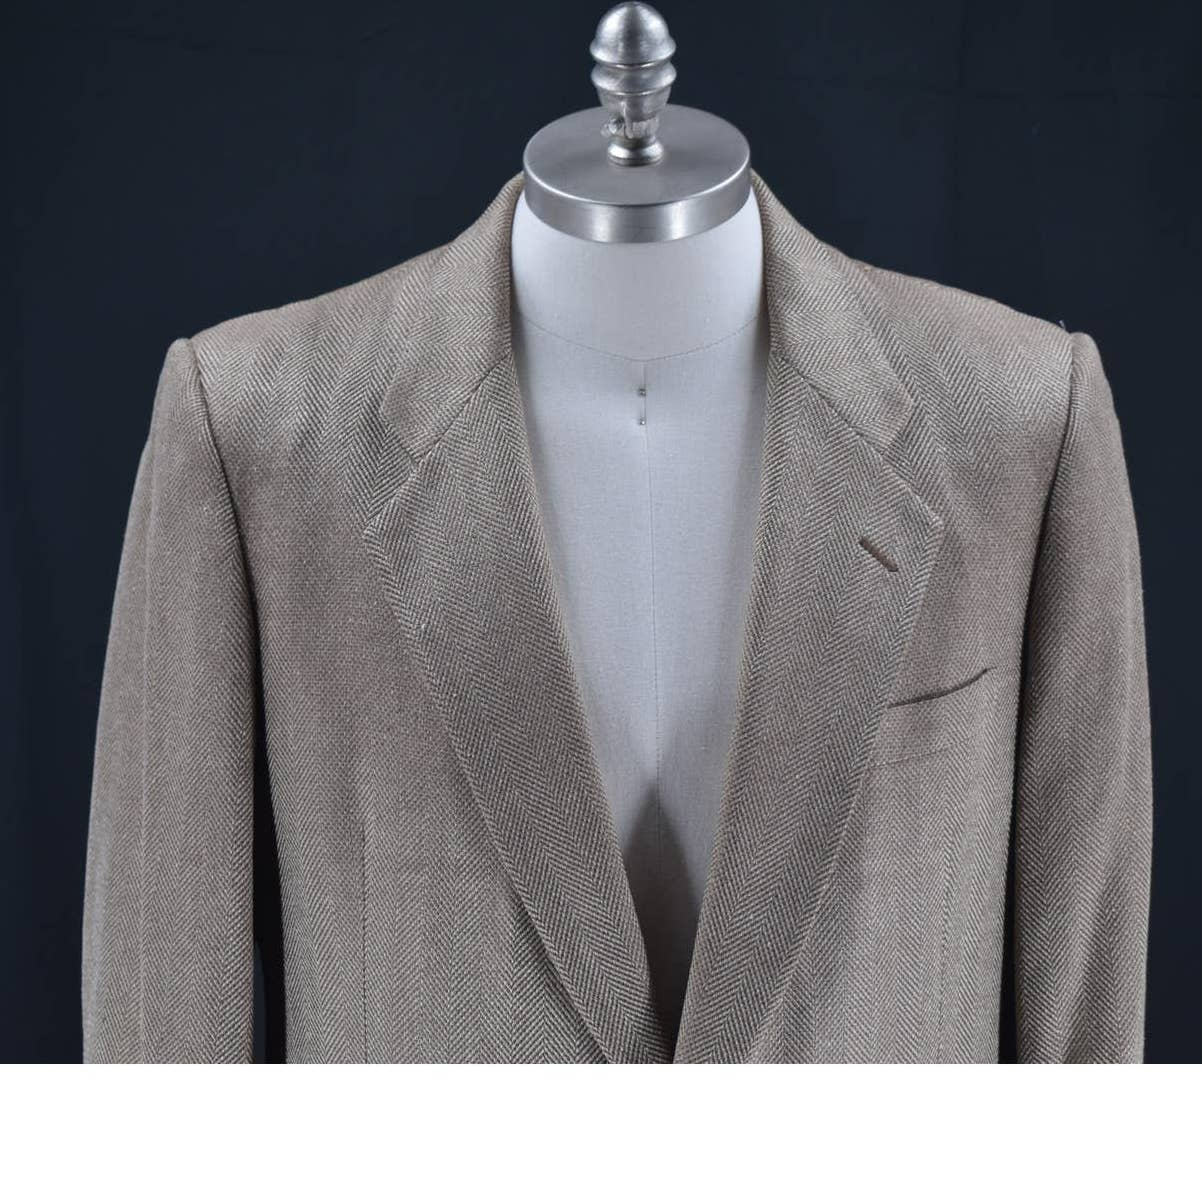 Vintage Christian Dior Tan Silk Tweed Two Button Single Breasted Blazer - 42S